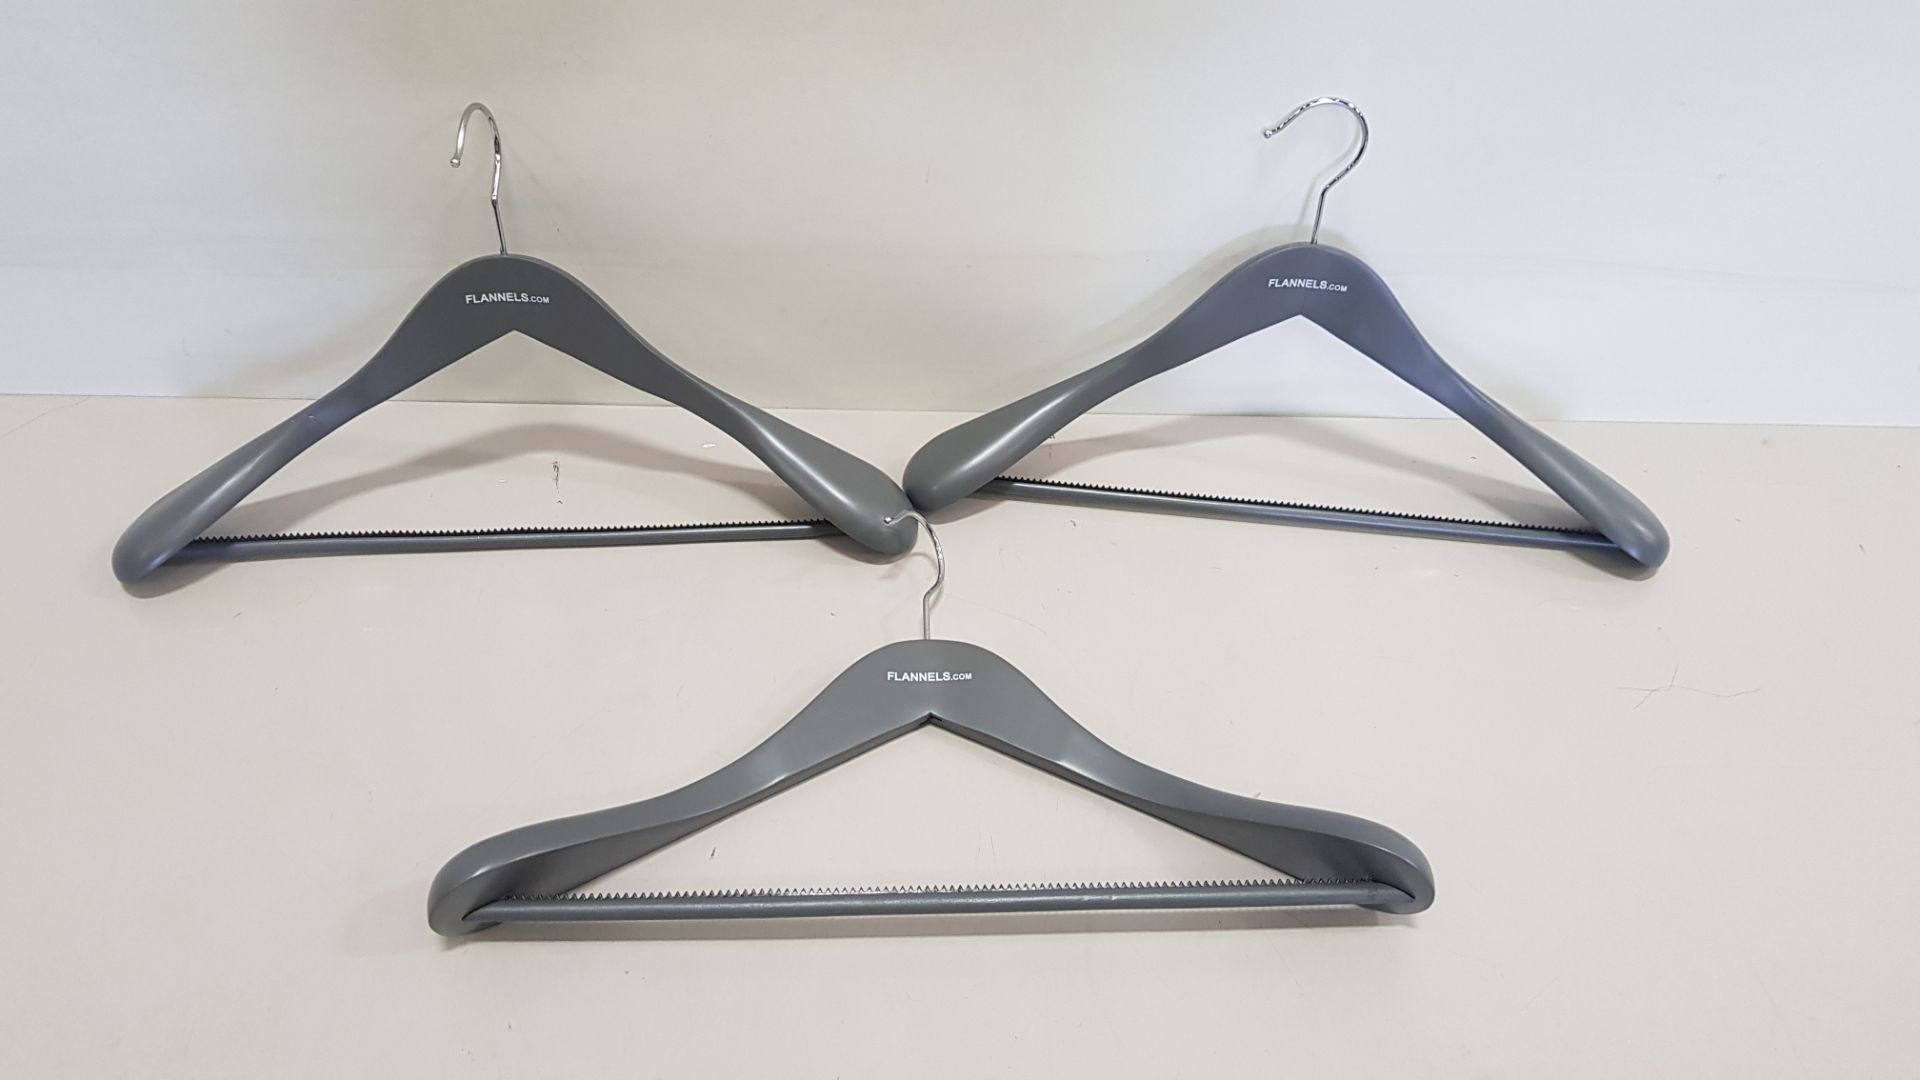 144 X BRAND NEW FLANNELS BRANDED COAT HANGERS WITH GRIPPED TROUSER BAR (IN 4 CARTONS) - (EBAY